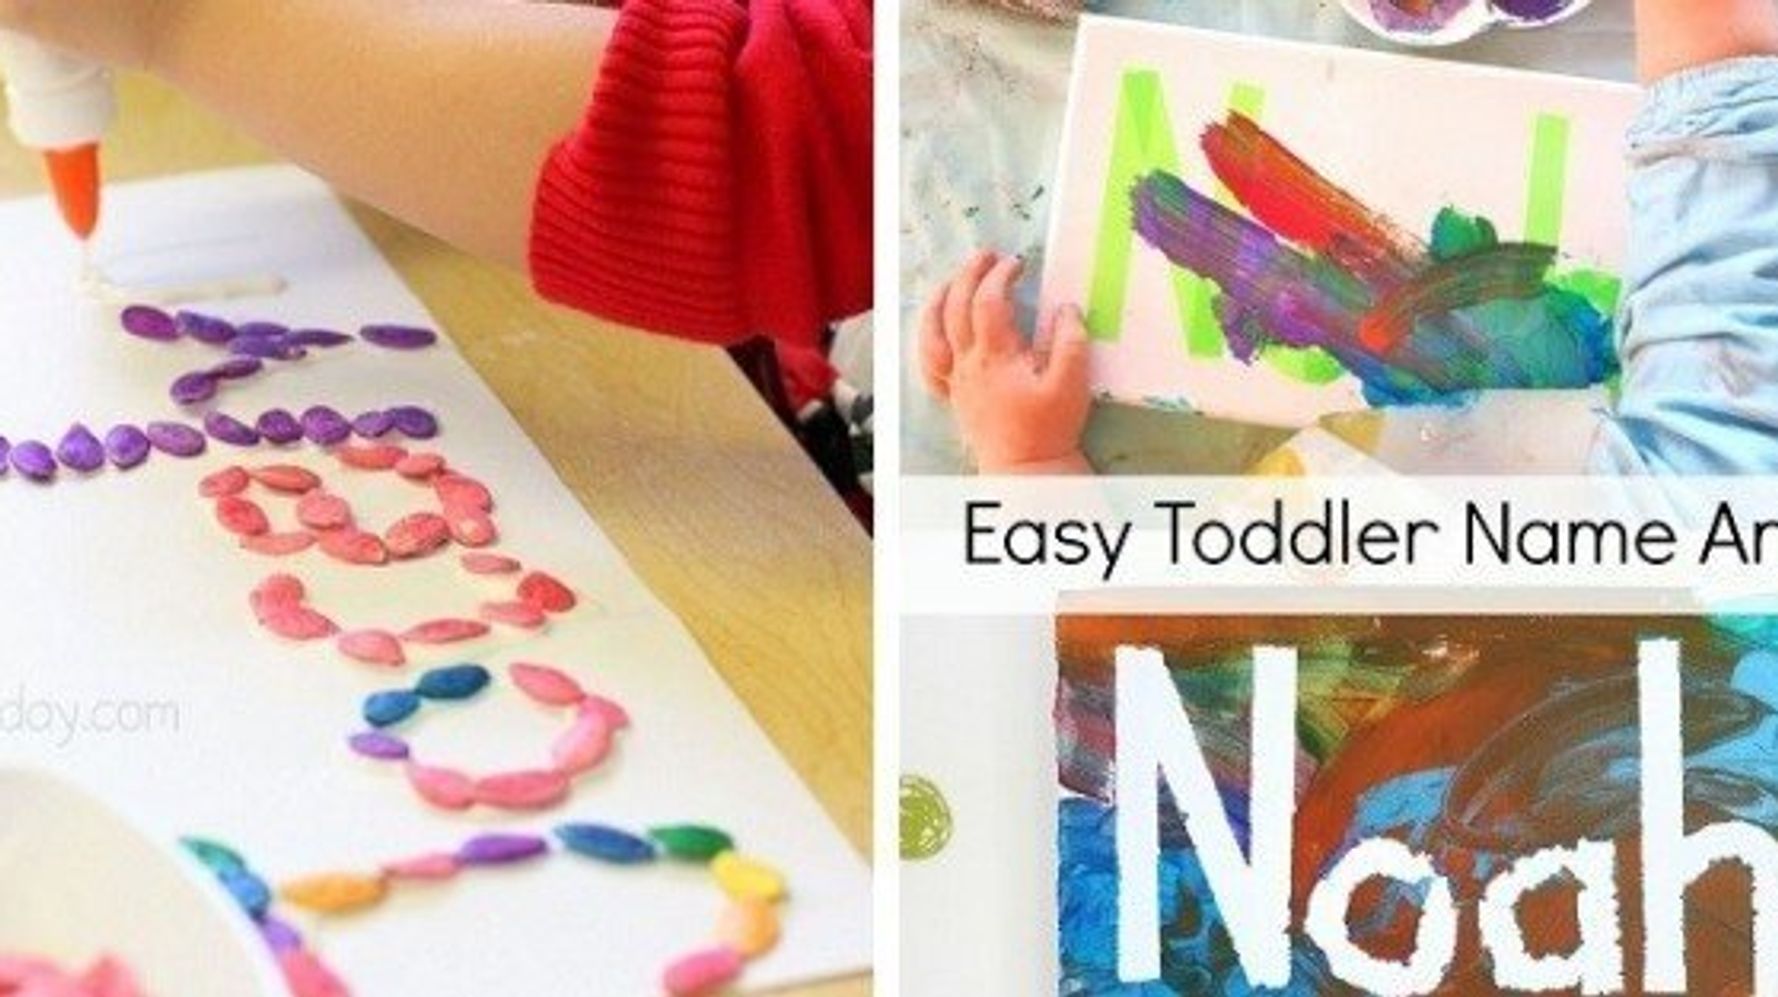 Learn with Play at Home: Easy Toddler Name Art